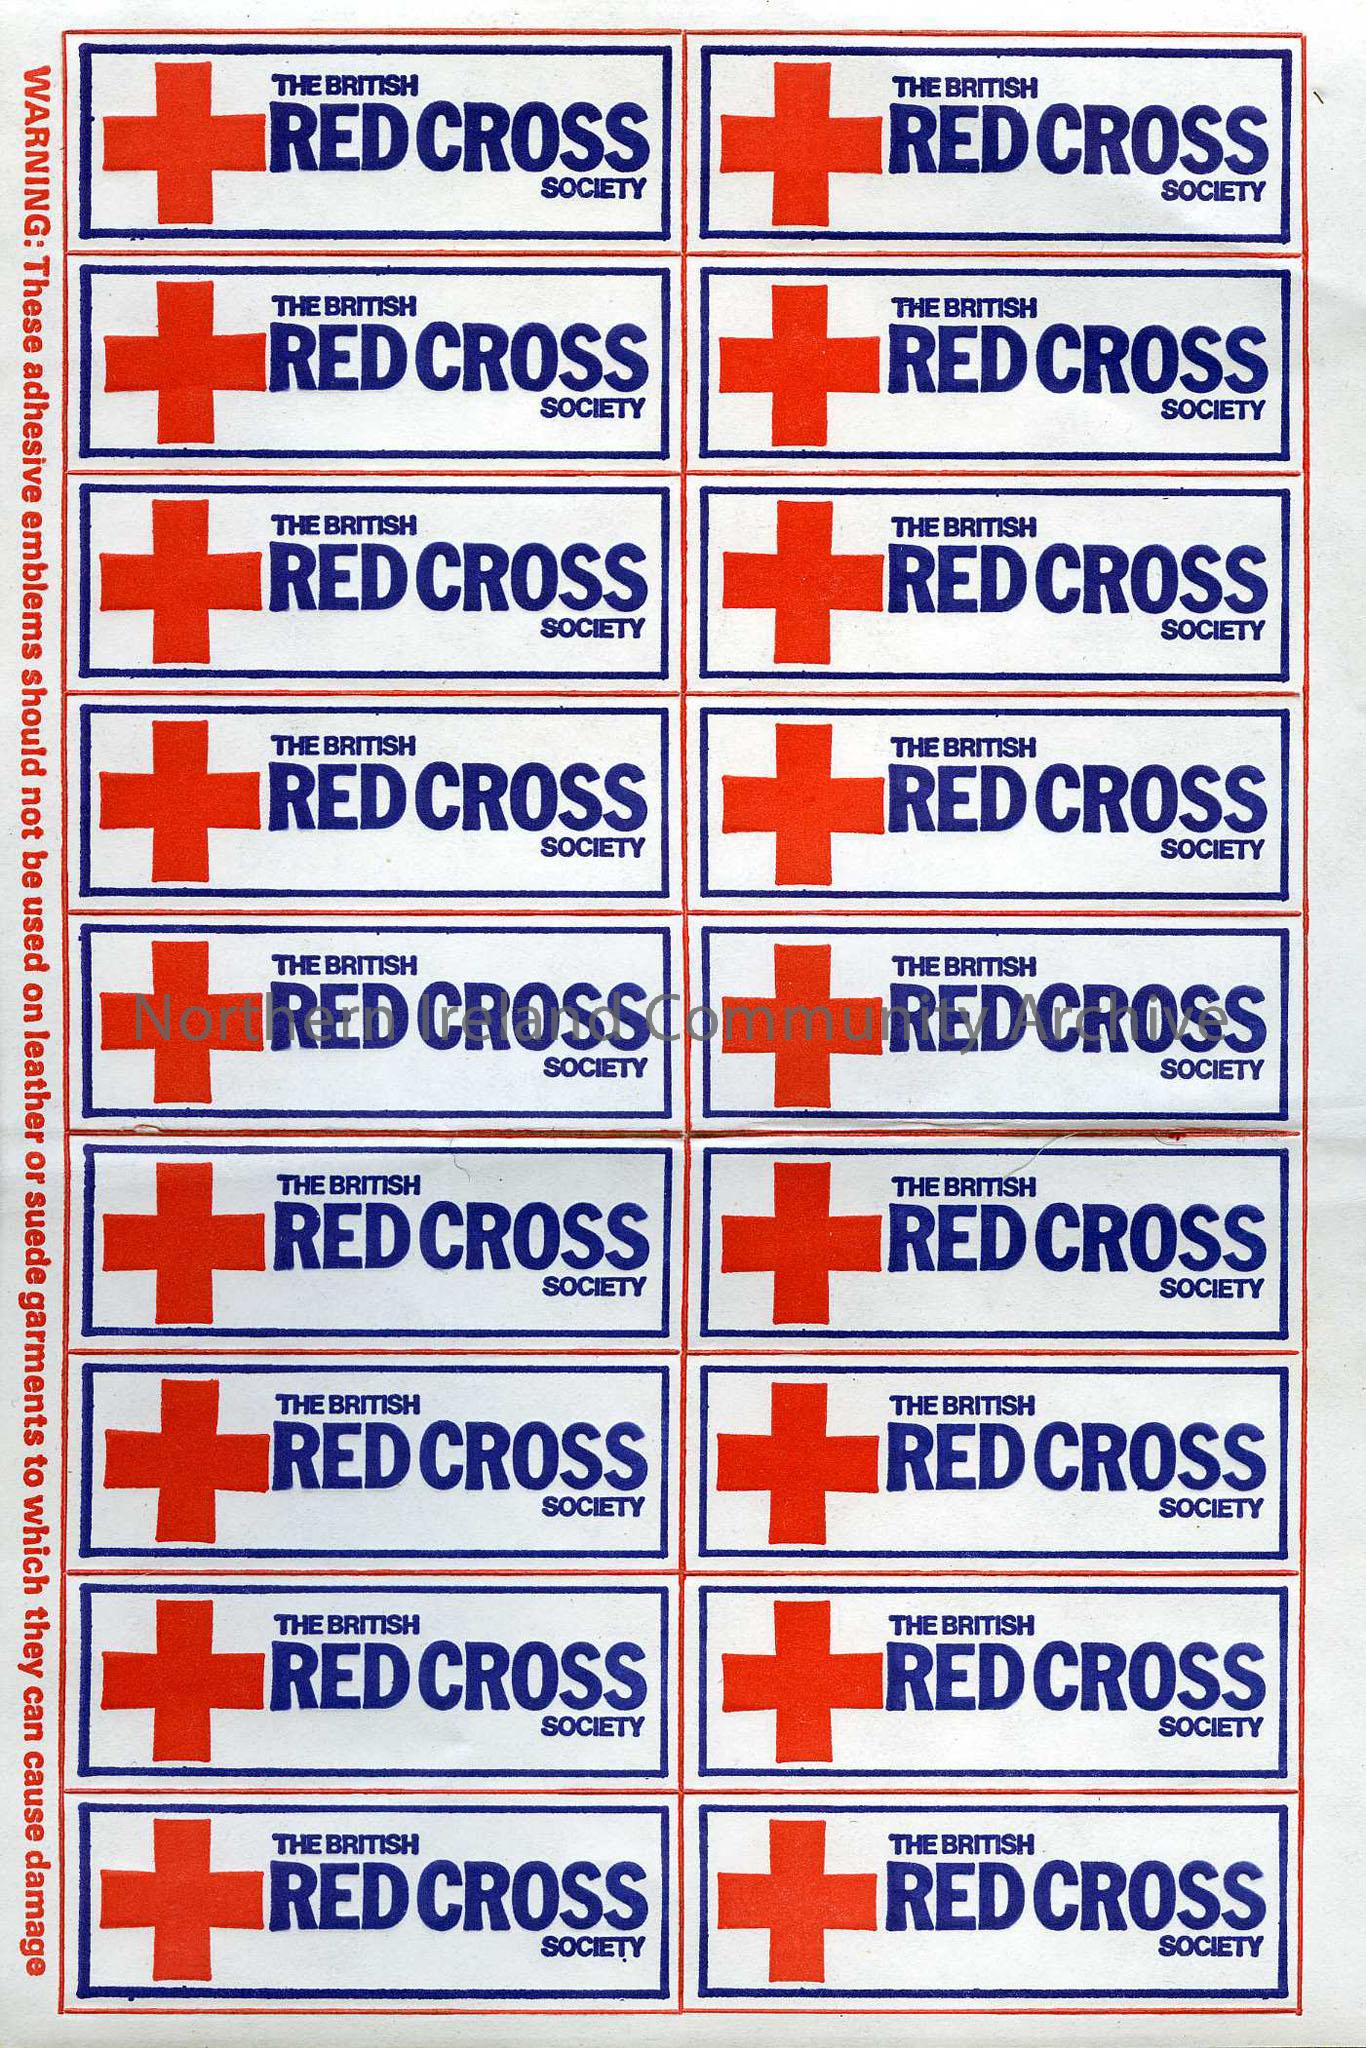 One page containing eighteen “The British Red Cross Society” stickers.